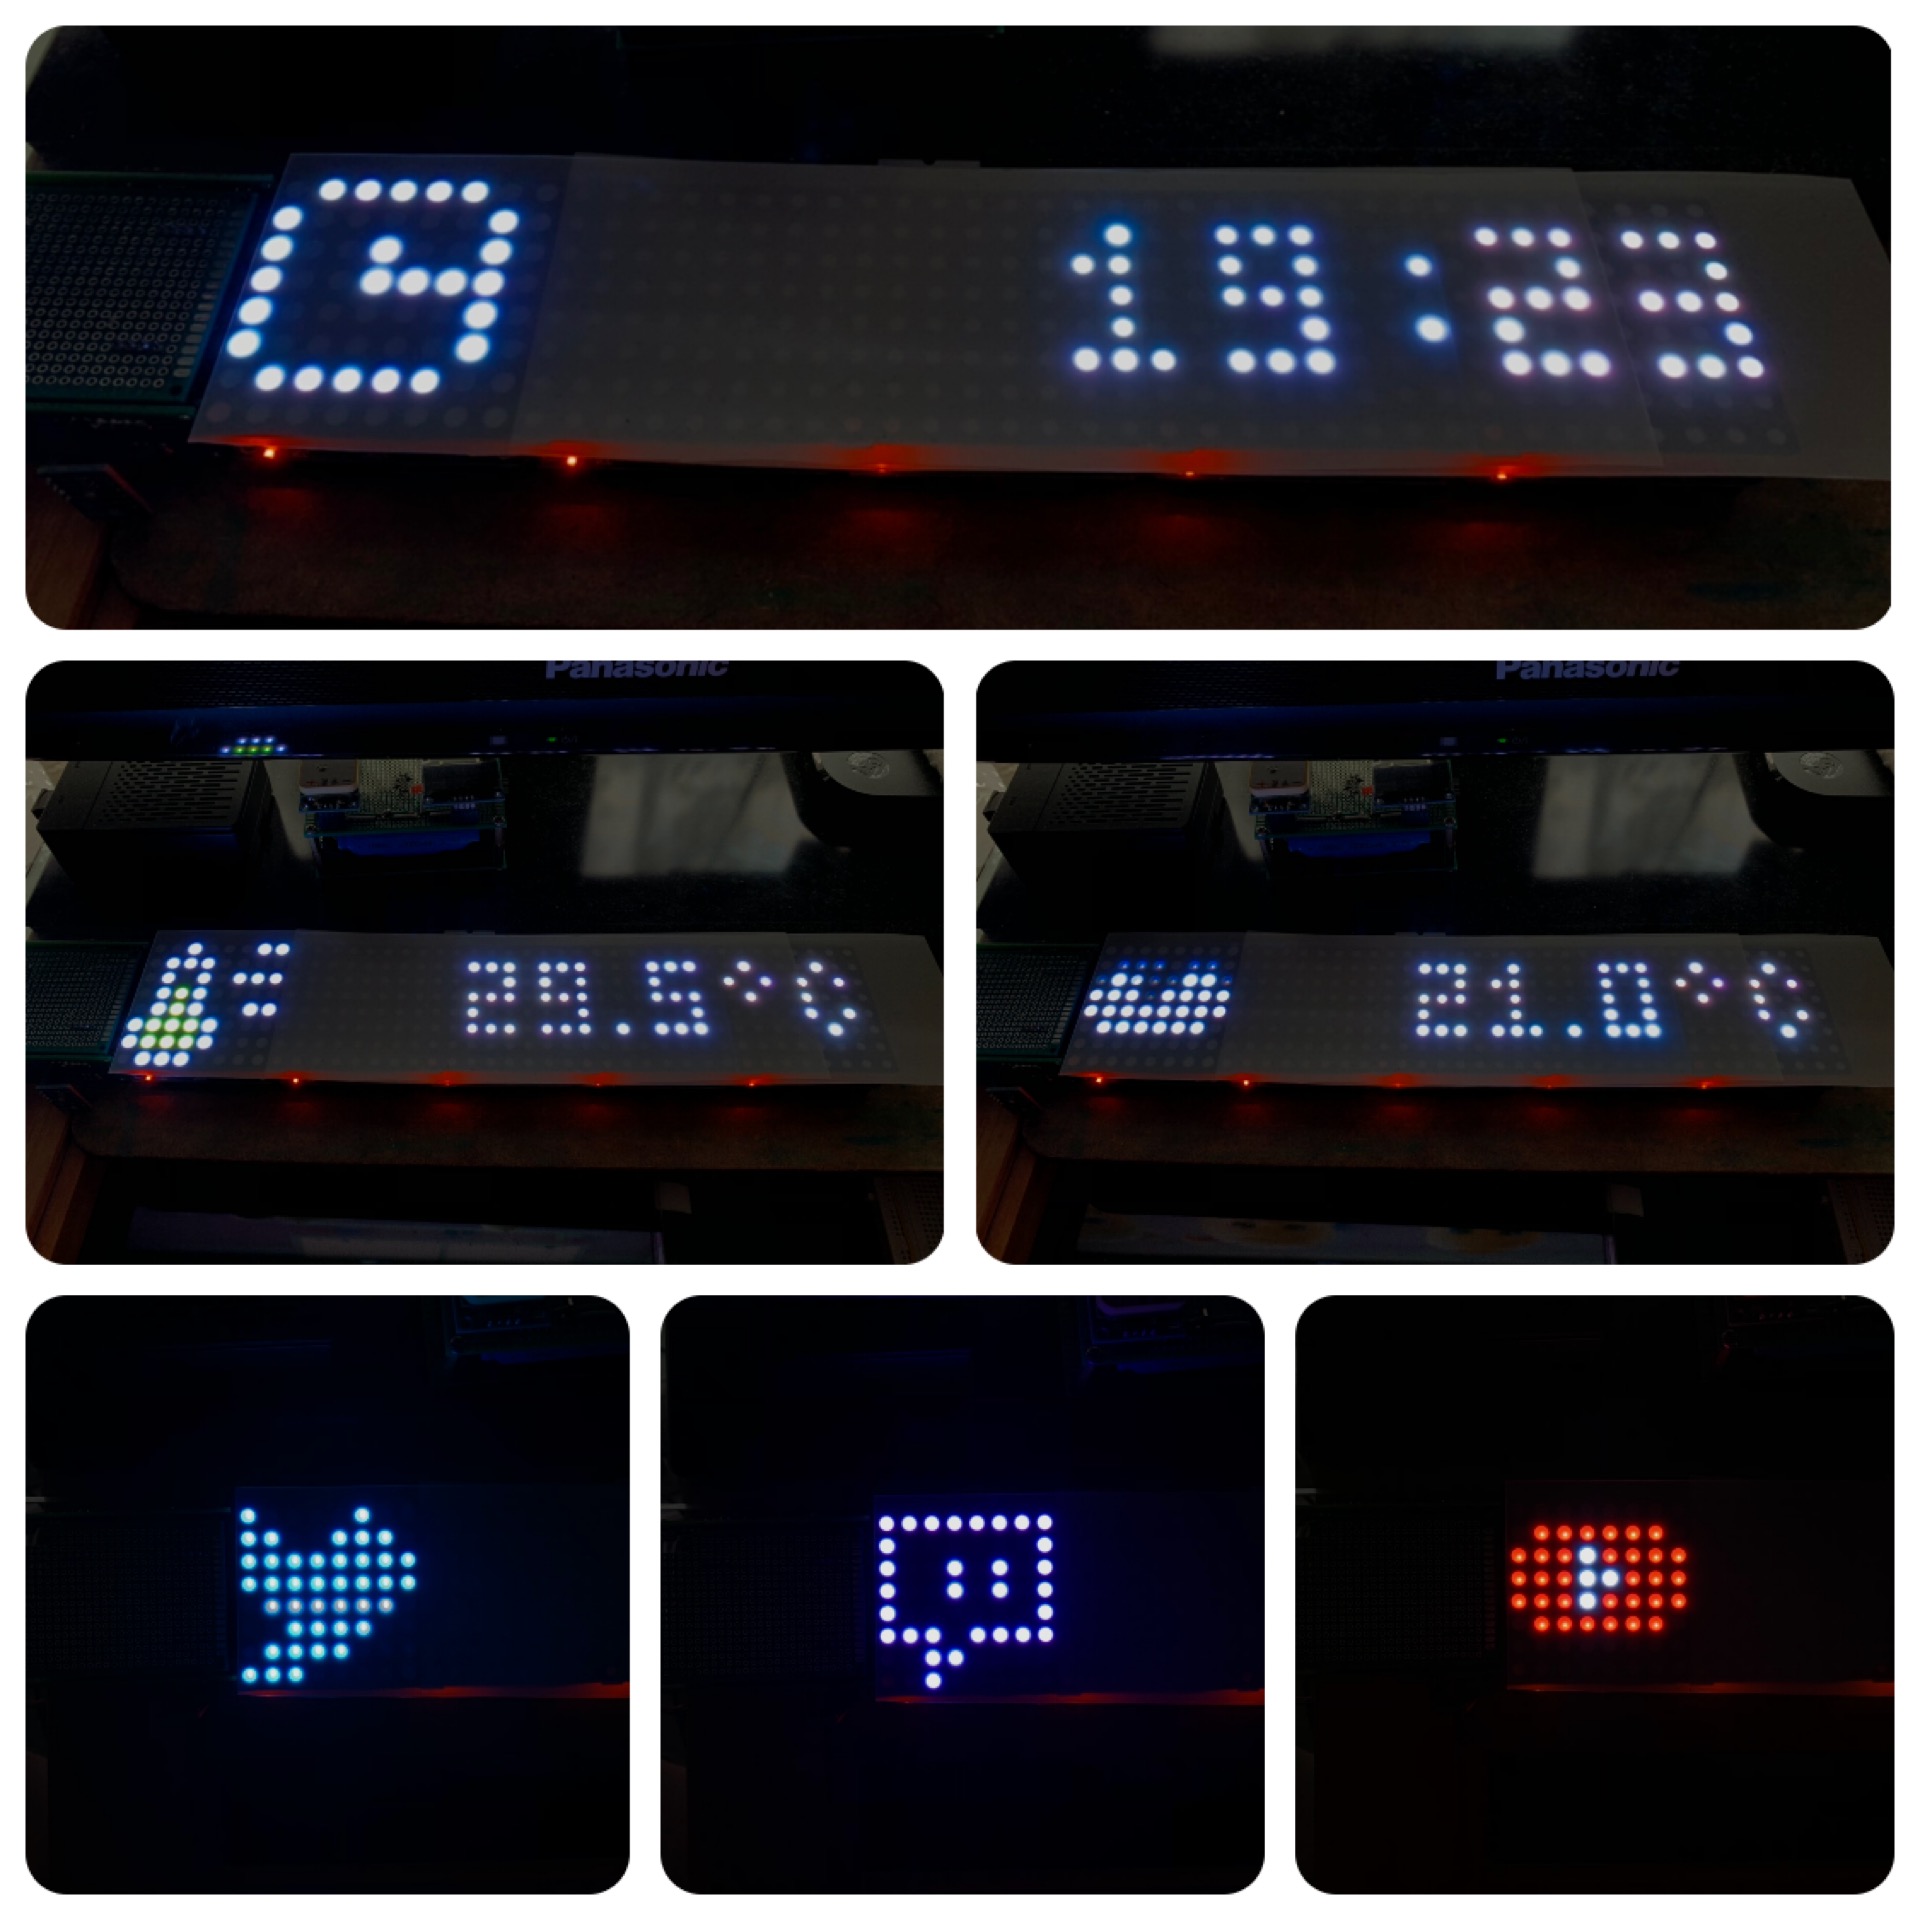 LaMetric Air displays home air quality, humidity, temperature, and more